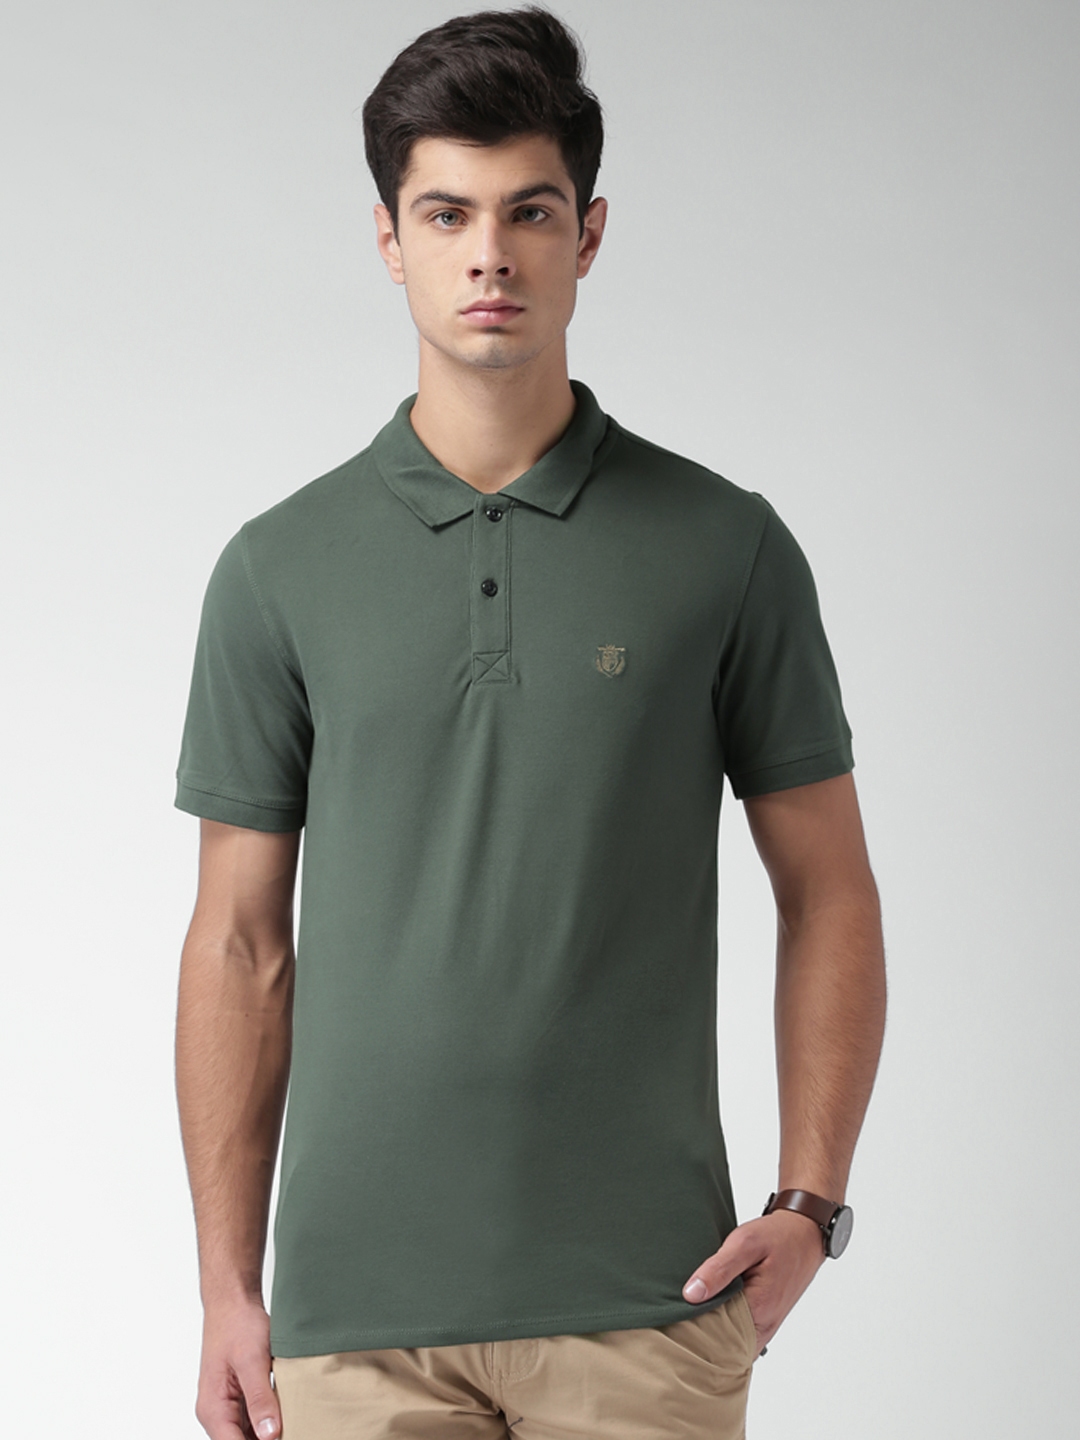 Buy SELECTED Olive Green Polo T Shirt - Tshirts for Men 1428813 | Myntra